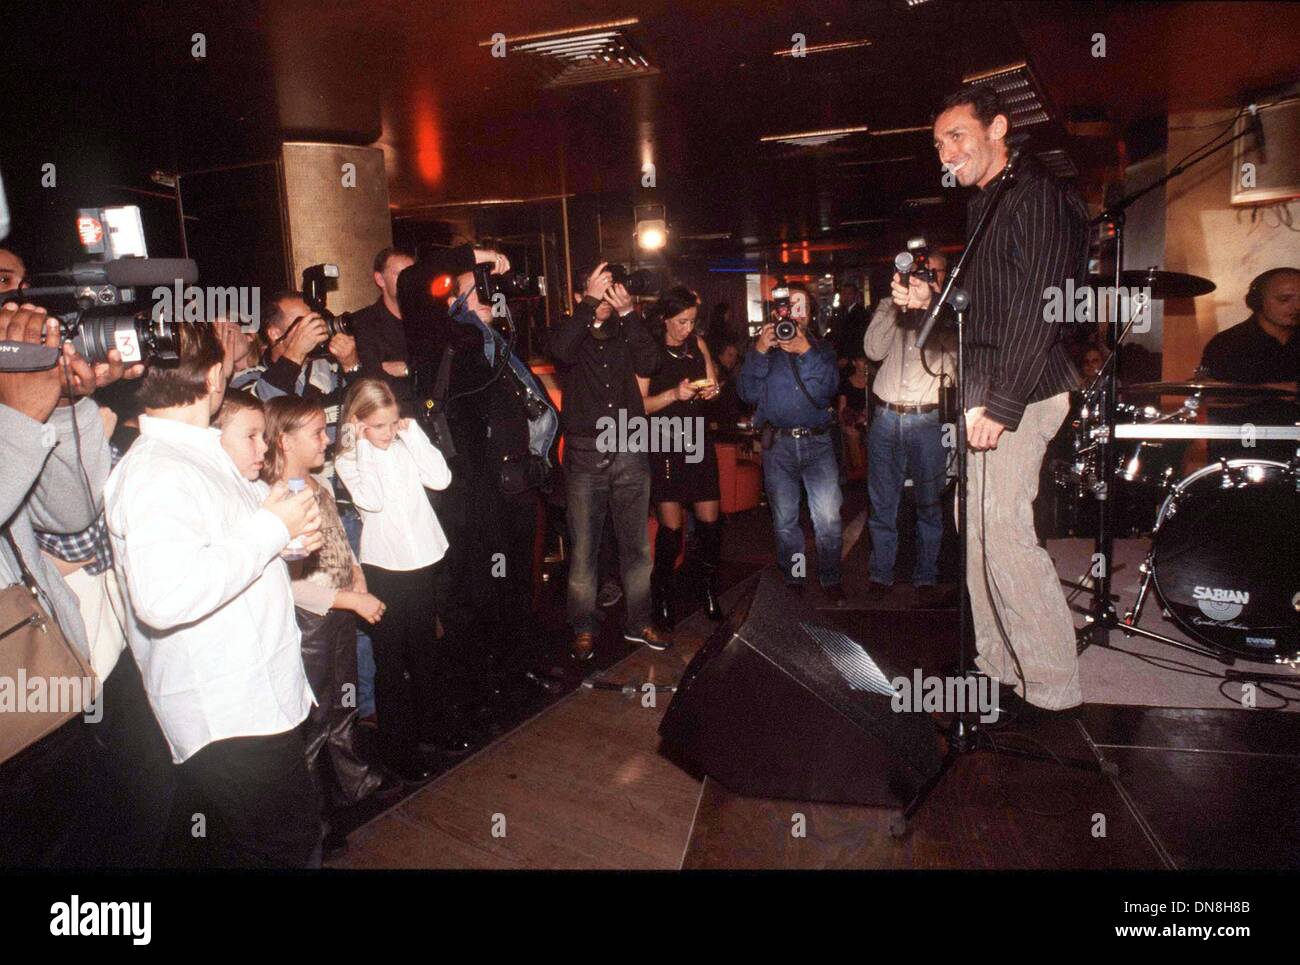 Oct. 31, 2002 - Â© IMAPRESS. PH : CHRISTIAN MOUTARDE. DANIEL DUCRUET, THE FORMER HUSBAND OF PRINCESS STEPHANIE OF MONACO, LAUNCHES HIS FIRST CD ''JMAIS PERSONNE'' (NEVER ANYBODY) AT THE CLUB ''L'ETOILE'' NEAR THE CHAMPS ELYSEES IN PARIS. THE CD IS PRODUCED BY ORLANDO, THE BROTHER OF THE FRENCH/EGYPTIAN SINGER DALIDA. IN THE AUDIENCE, A NUMBER OF VIP'S INCLUDING DUCRUET'S THREE CHIL Stock Photo